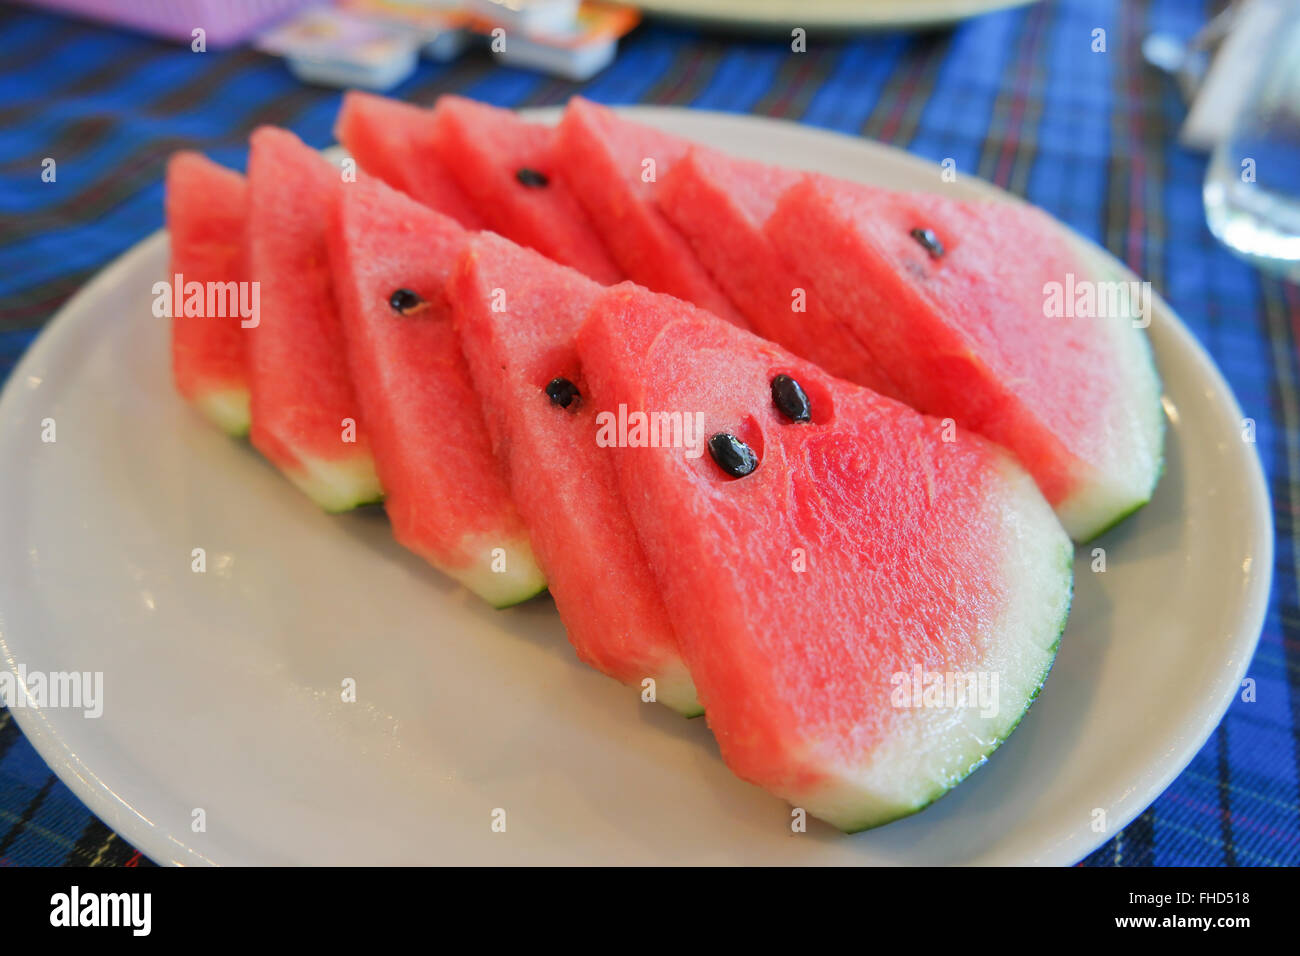 Watermelon In the white plate on the dining table. Stock Photo